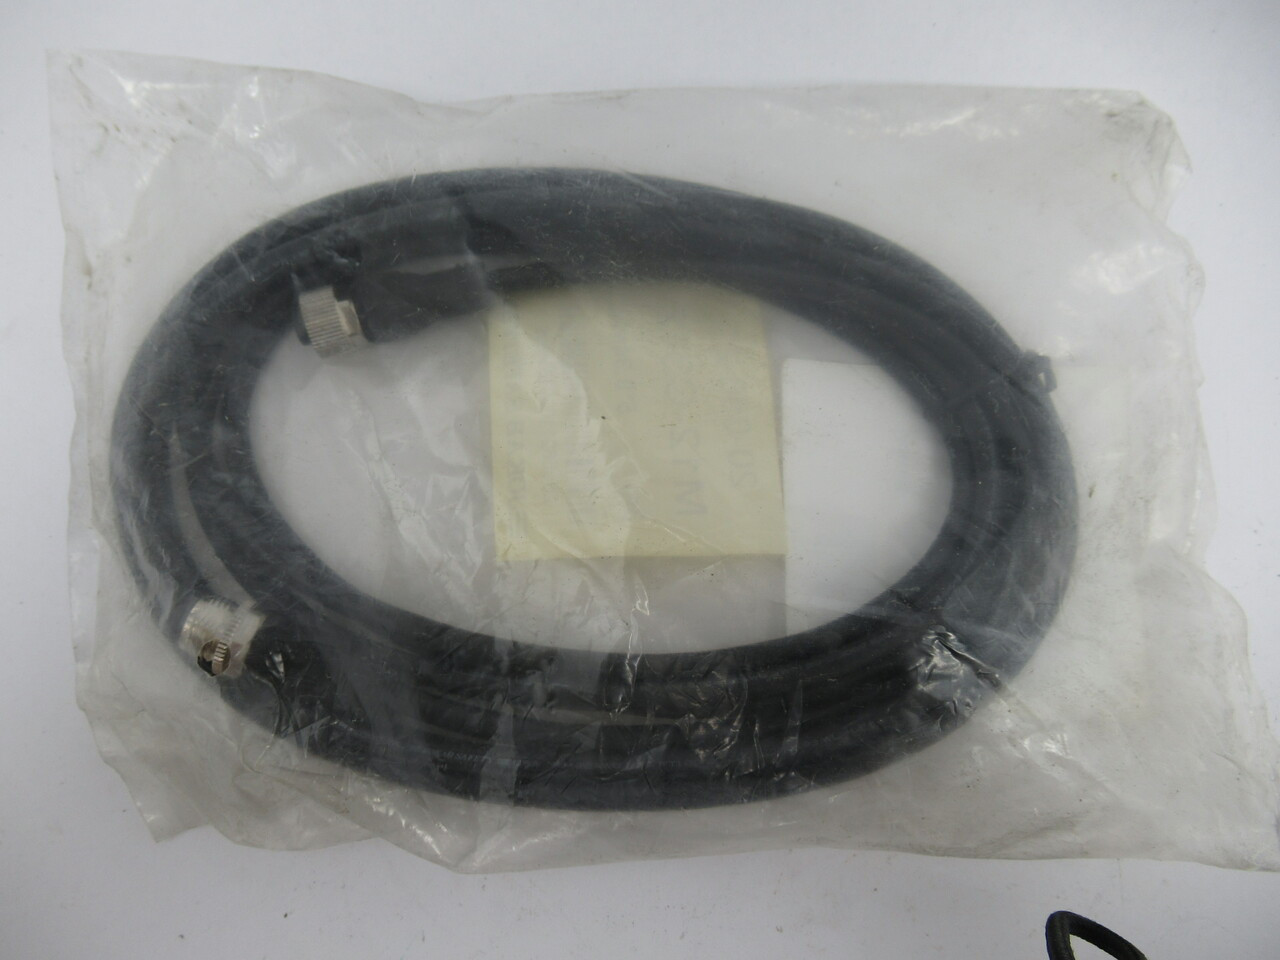 ABB Jokab Safety M12-C312 Shielded Cable 5-Pin 3m Length NWB